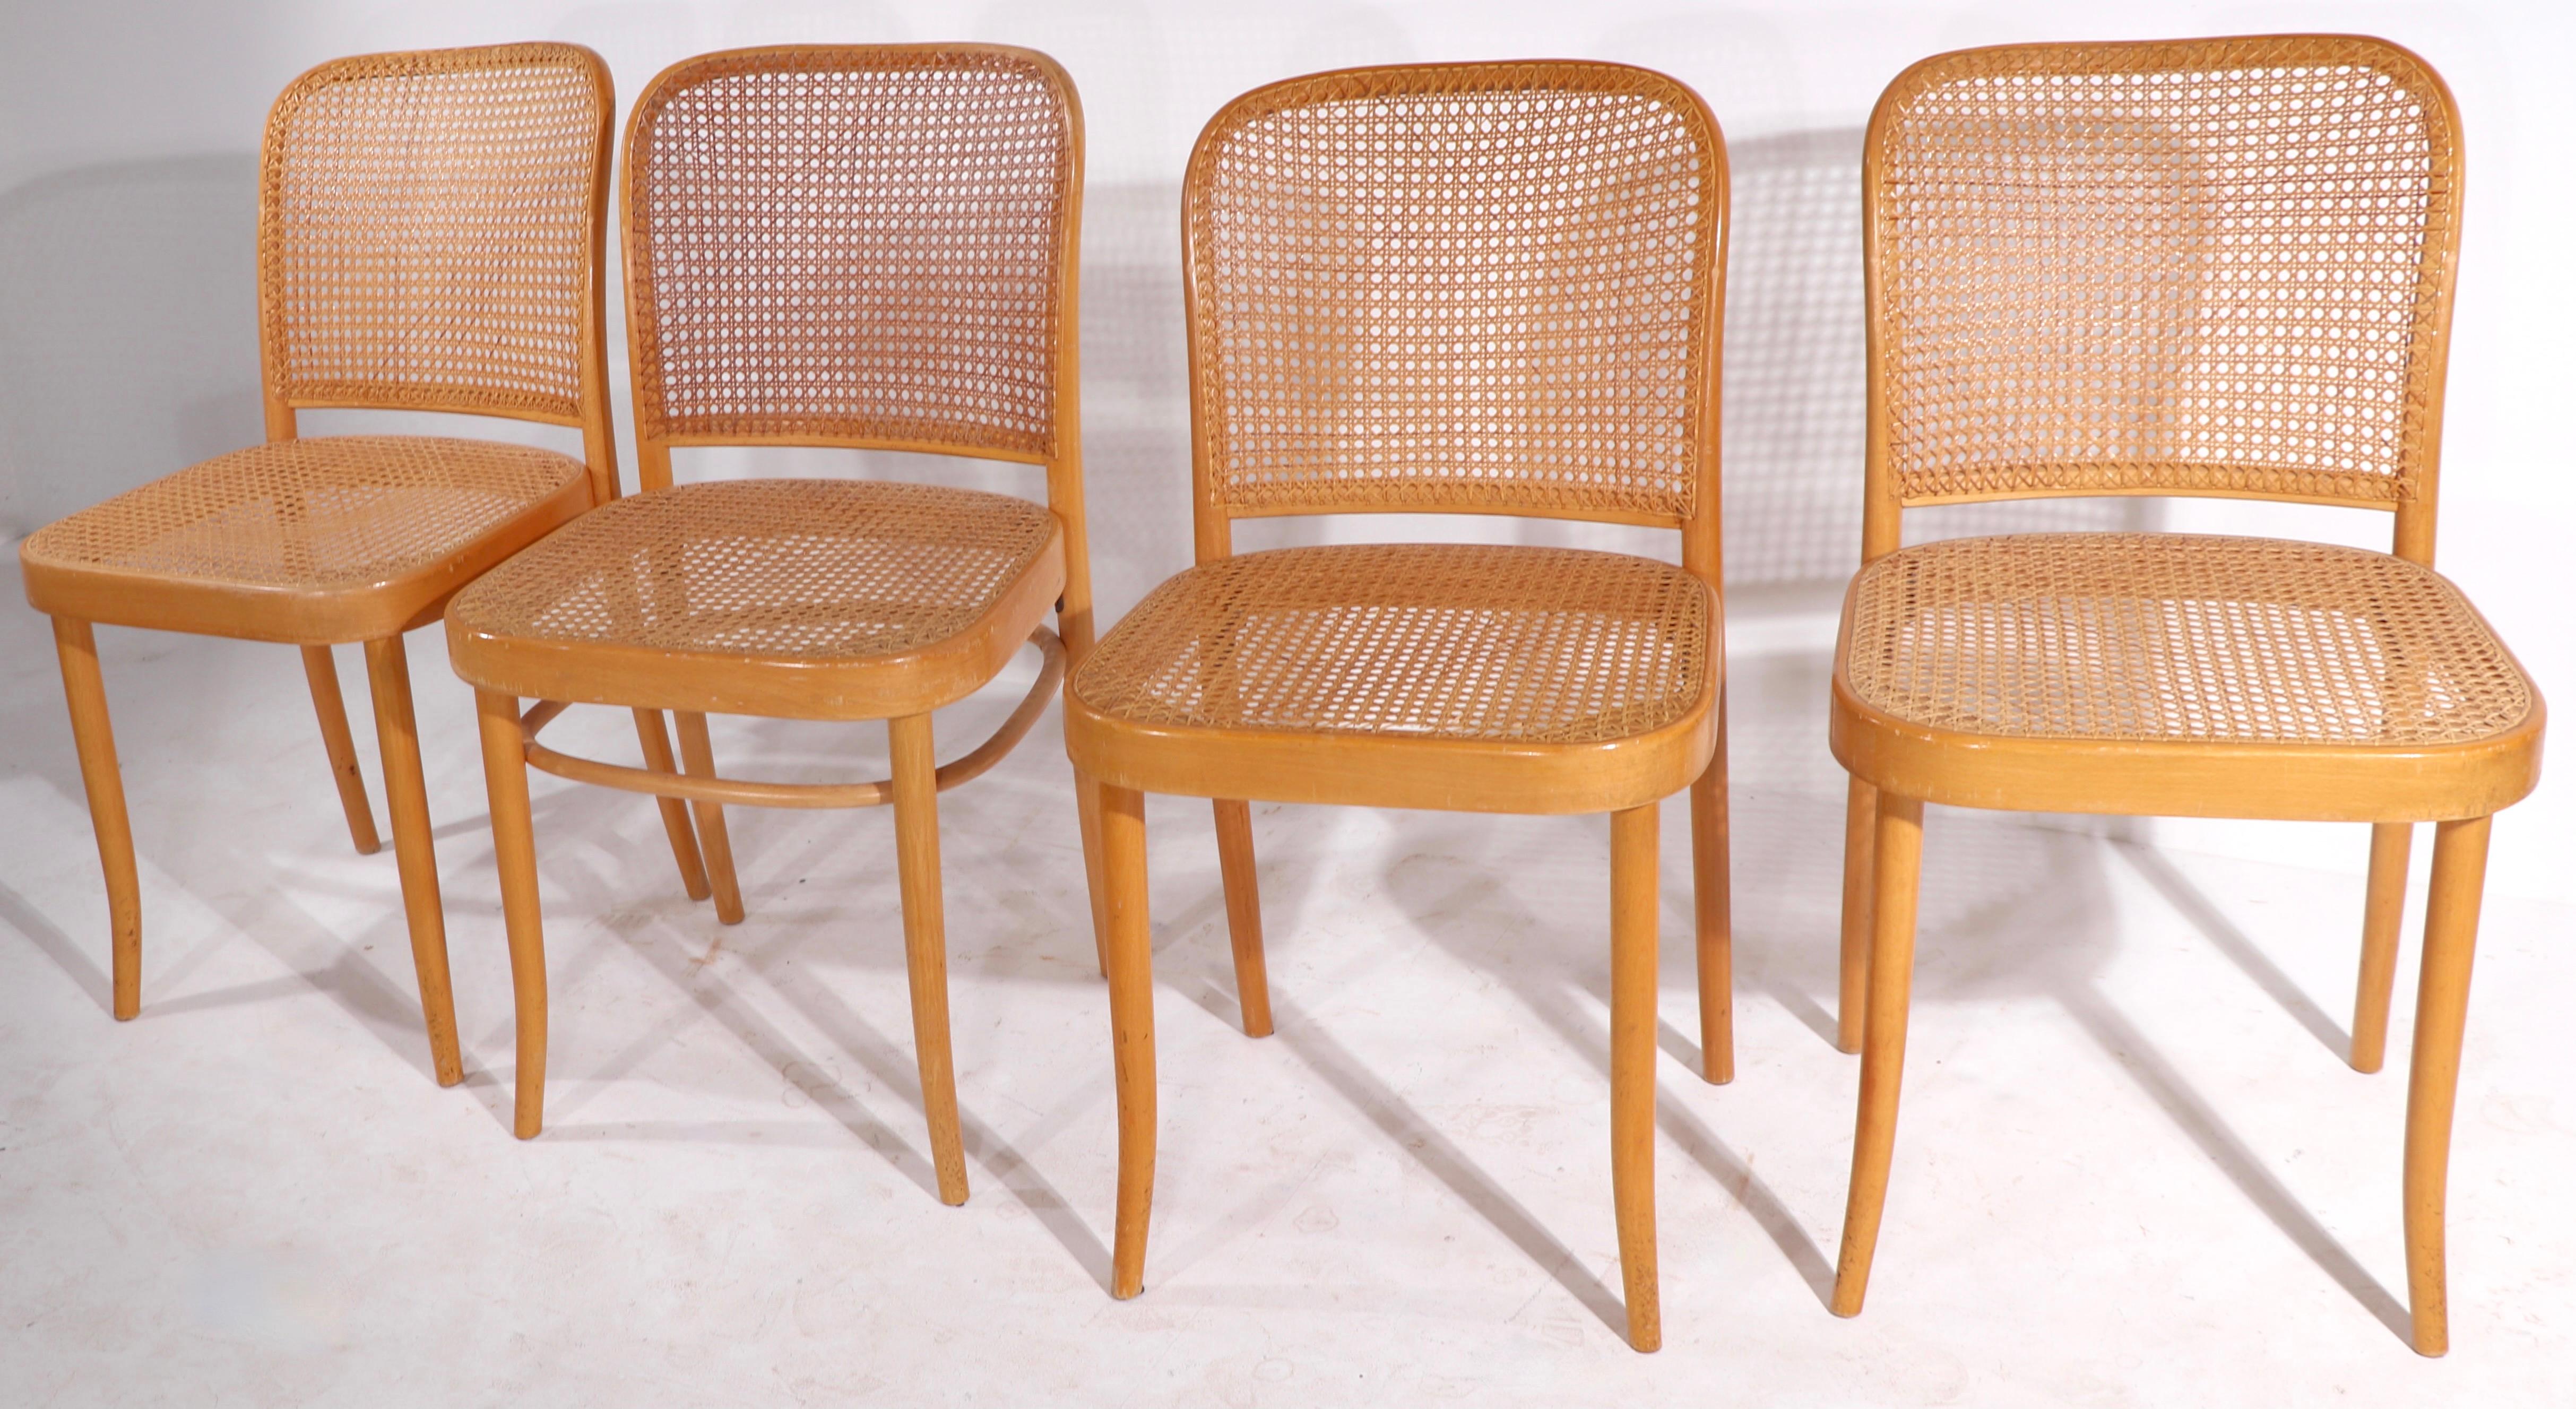 20th Century Set of 4 Prague Chairs by Breuer for Stendig